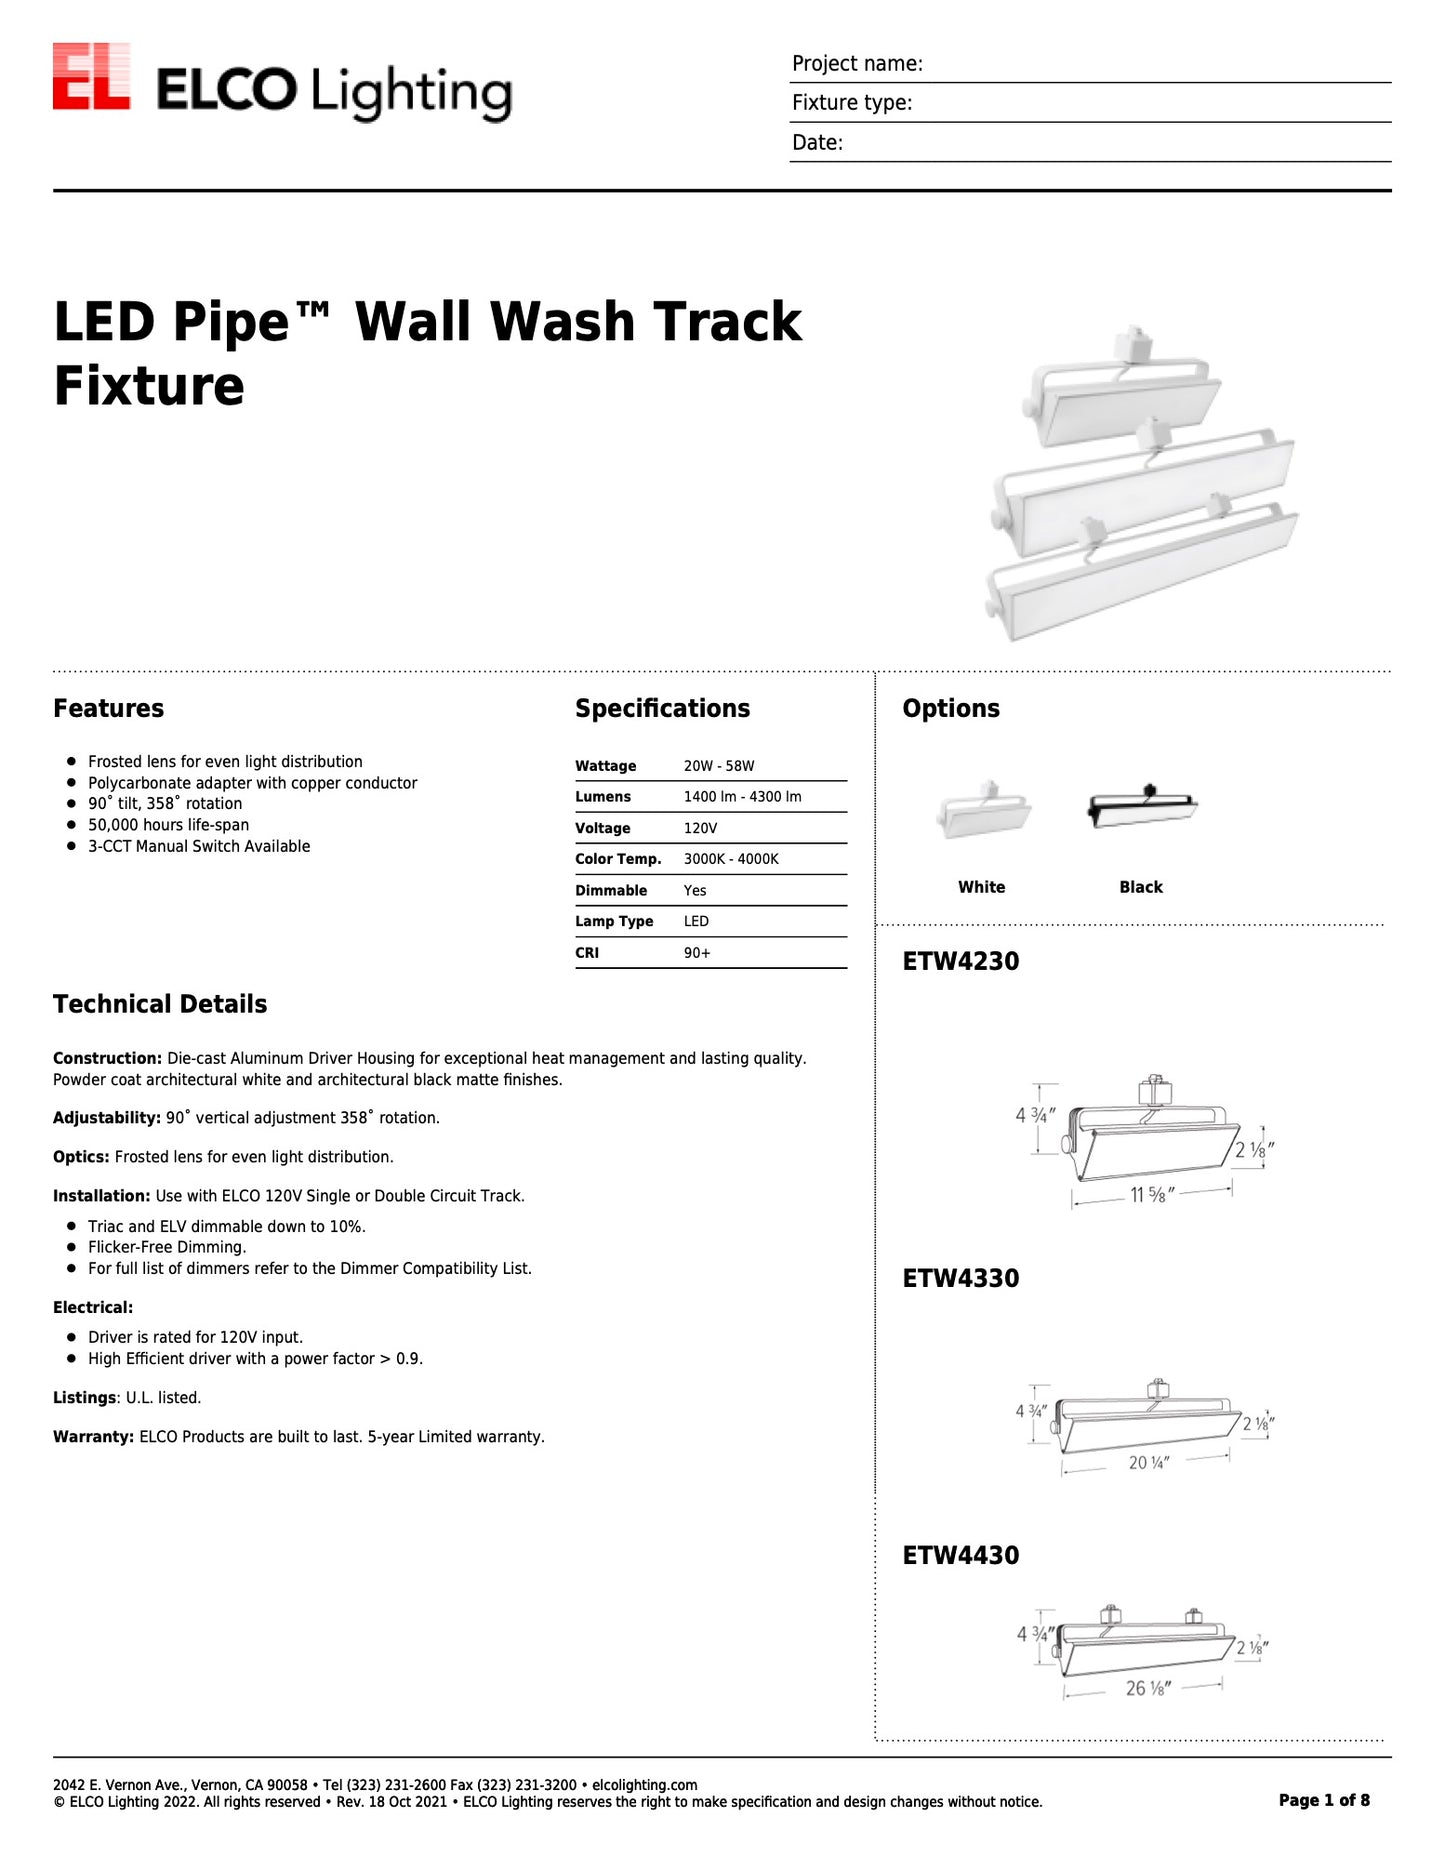 Elco Pipe LED Wall Wash Track Fixture (12'')